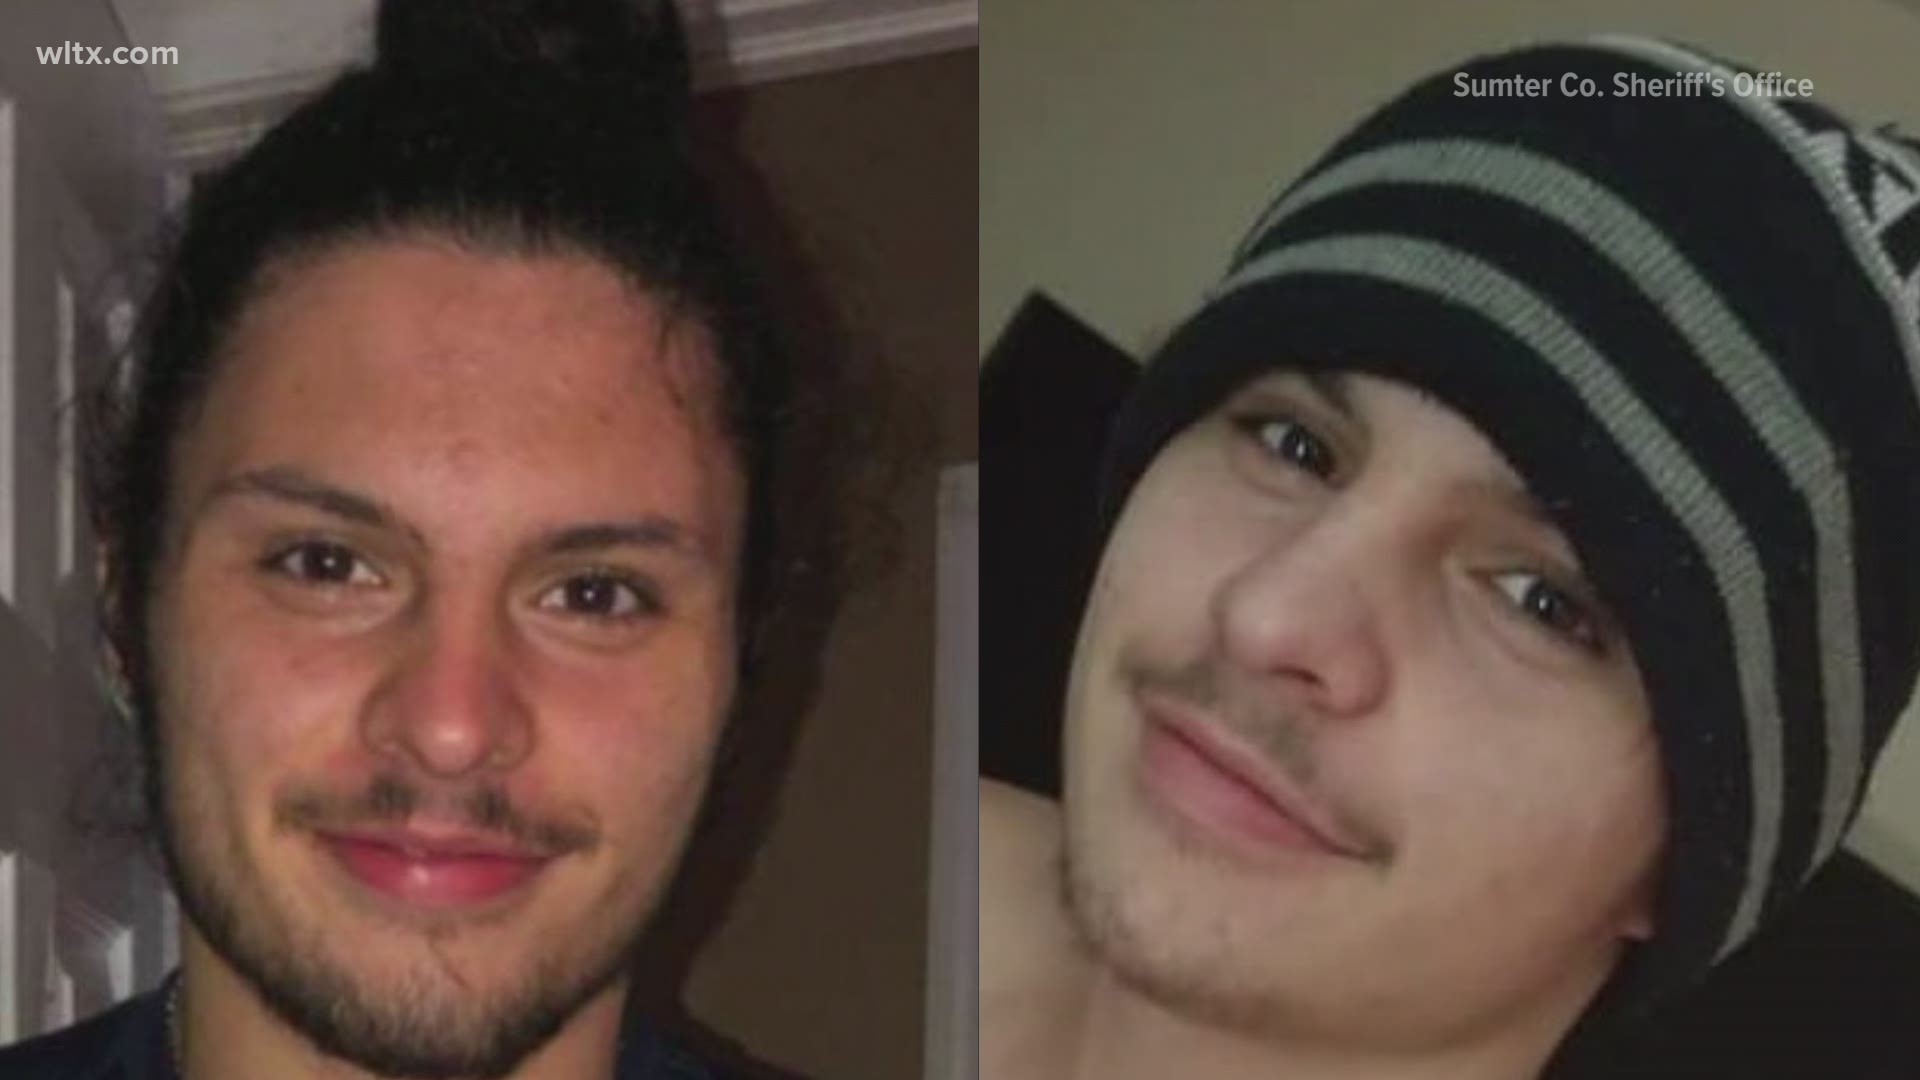 Brent Garcia, 18, was last seen the day after Christmas. His family is out searching for where he may be.